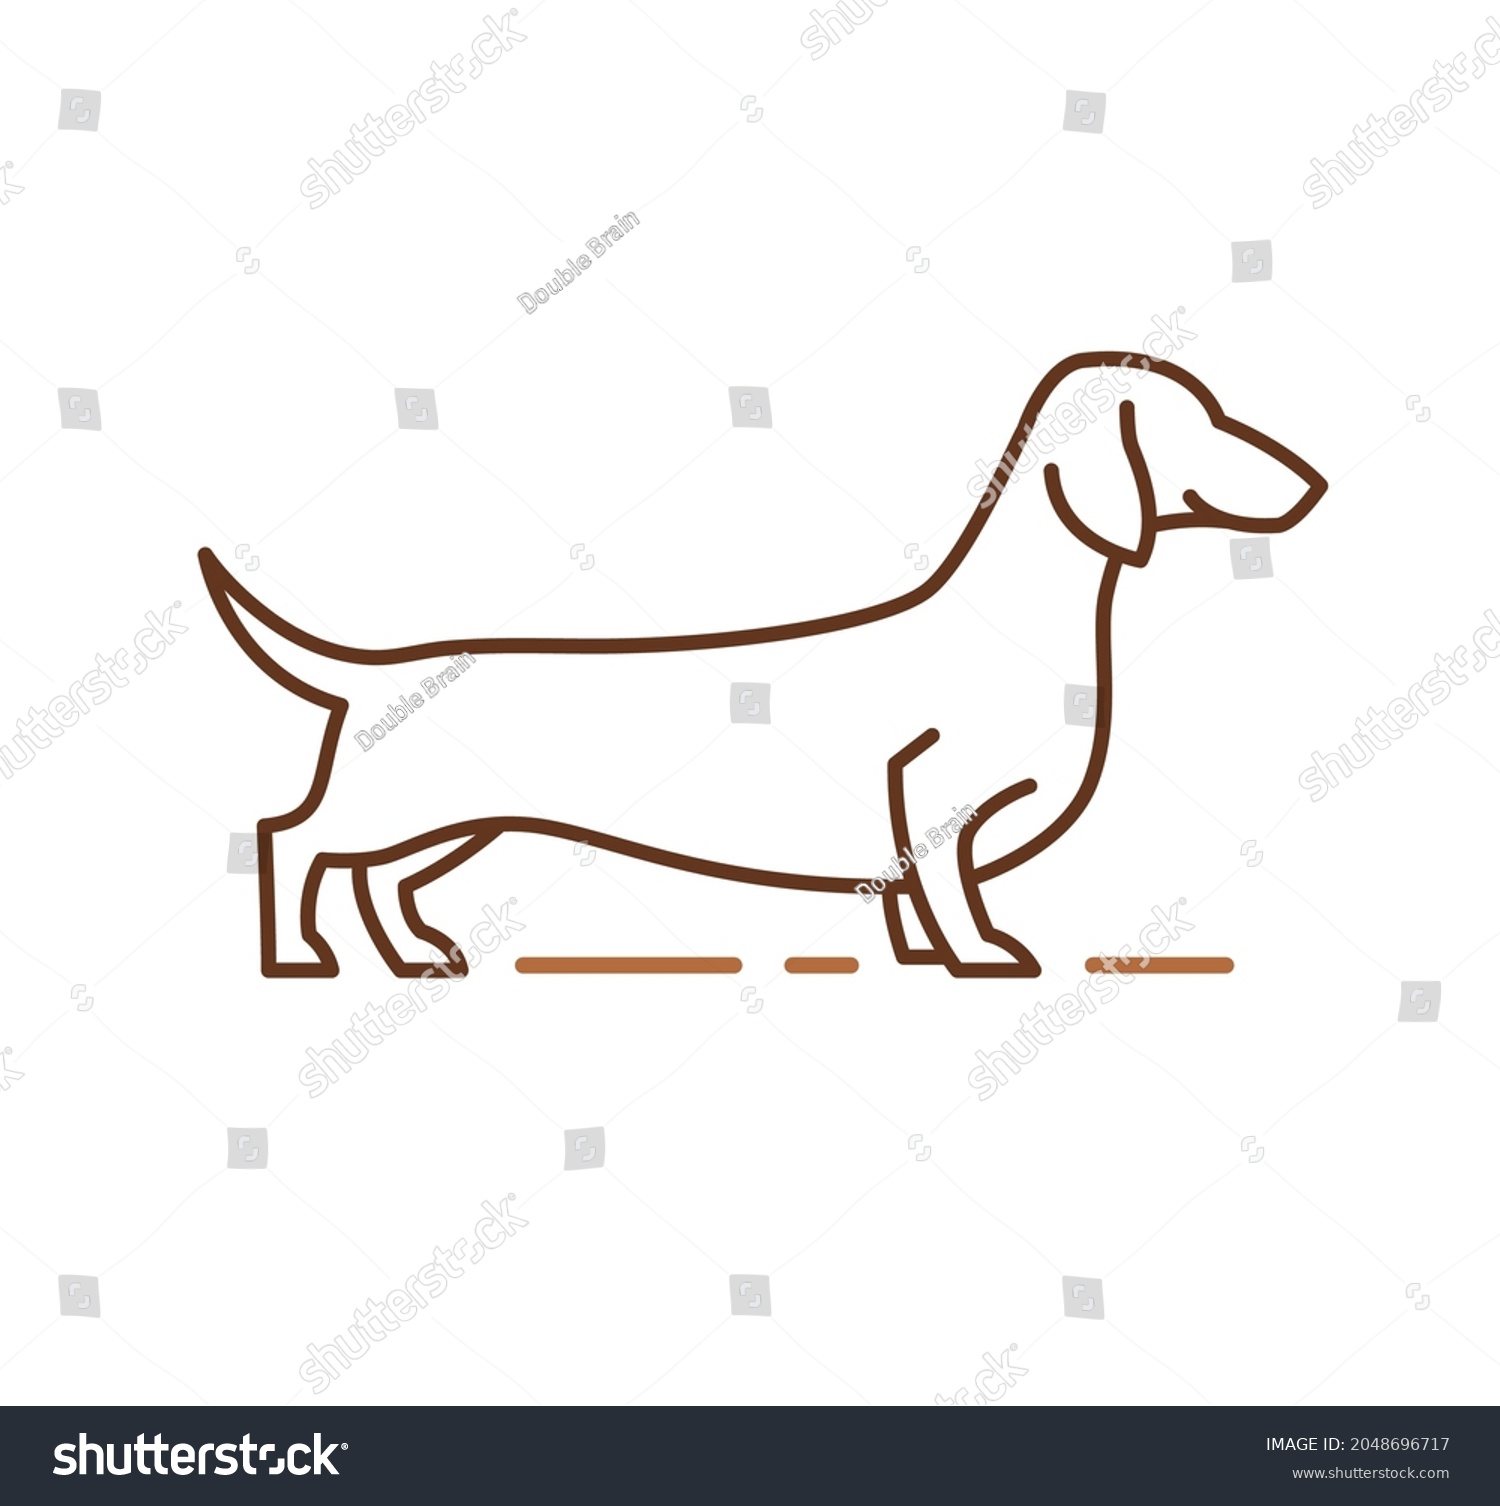 SVG of Dachshund icon, purebred dog mascot, pedigree friendly pets sign. Outline hand drawn vector illustration for logo identity of veterinary clinic, pet store products, isolated on white background. svg